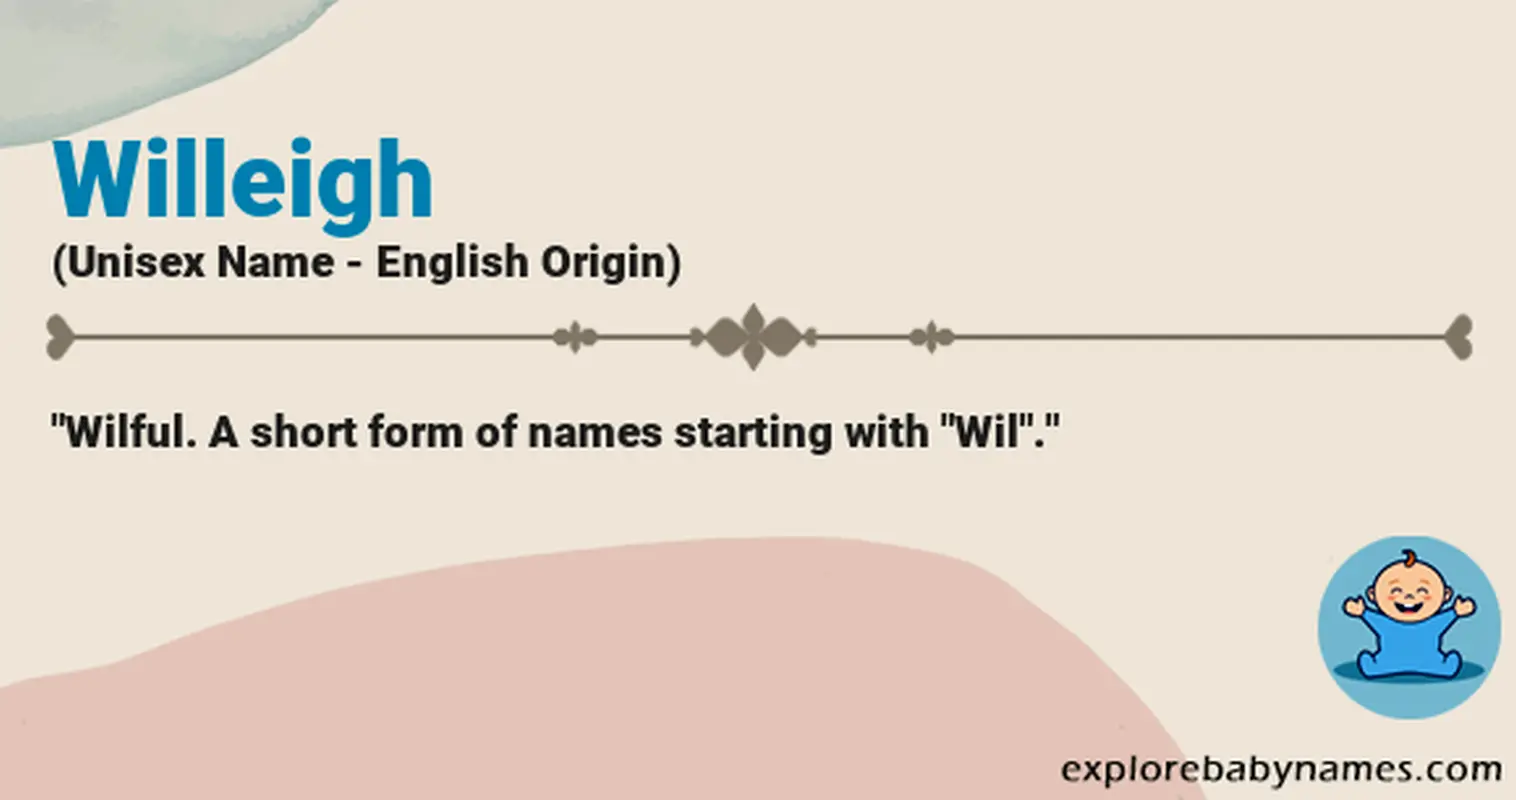 Meaning of Willeigh